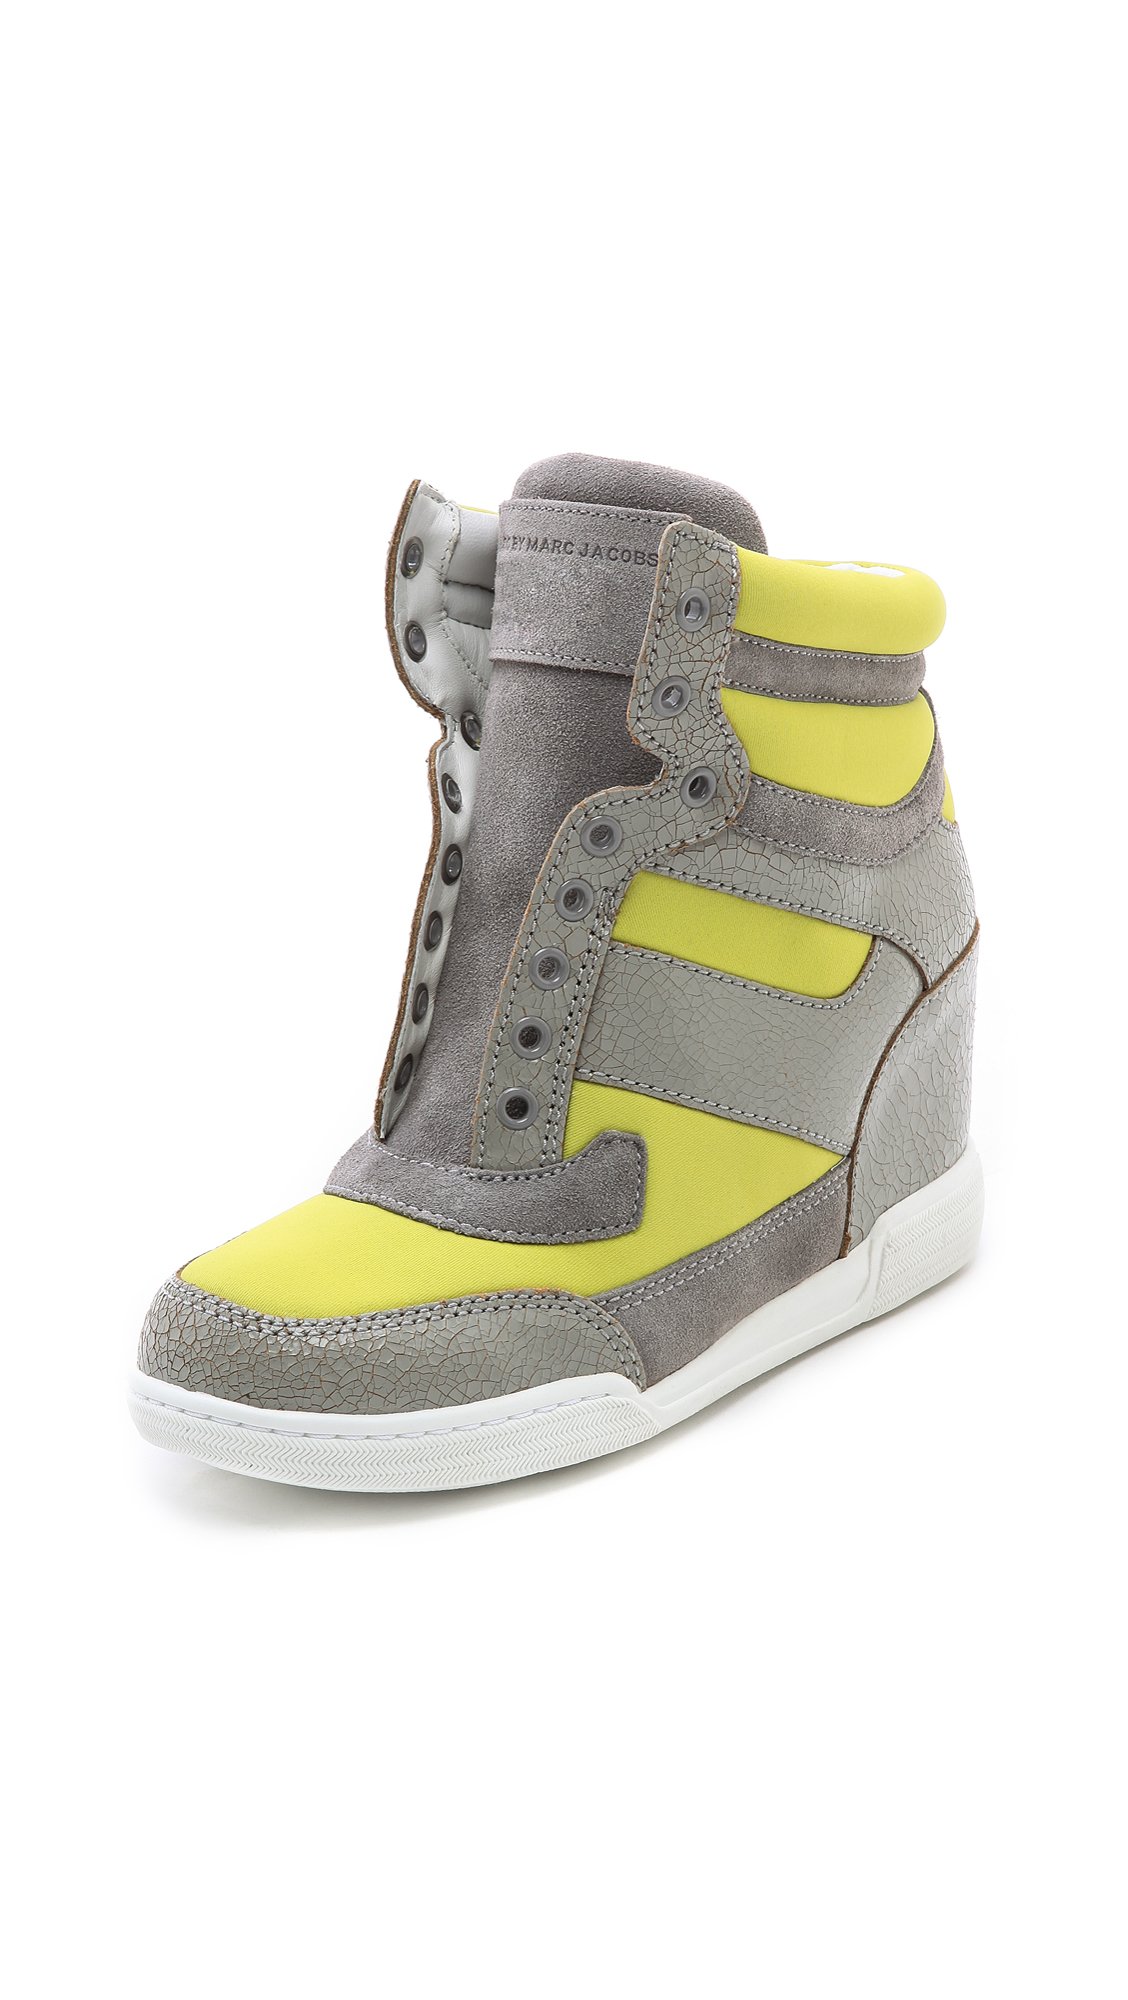 Marc By Marc Jacobs Low Wedge Sneakers in Yellow (Yellow/Grey) | Lyst